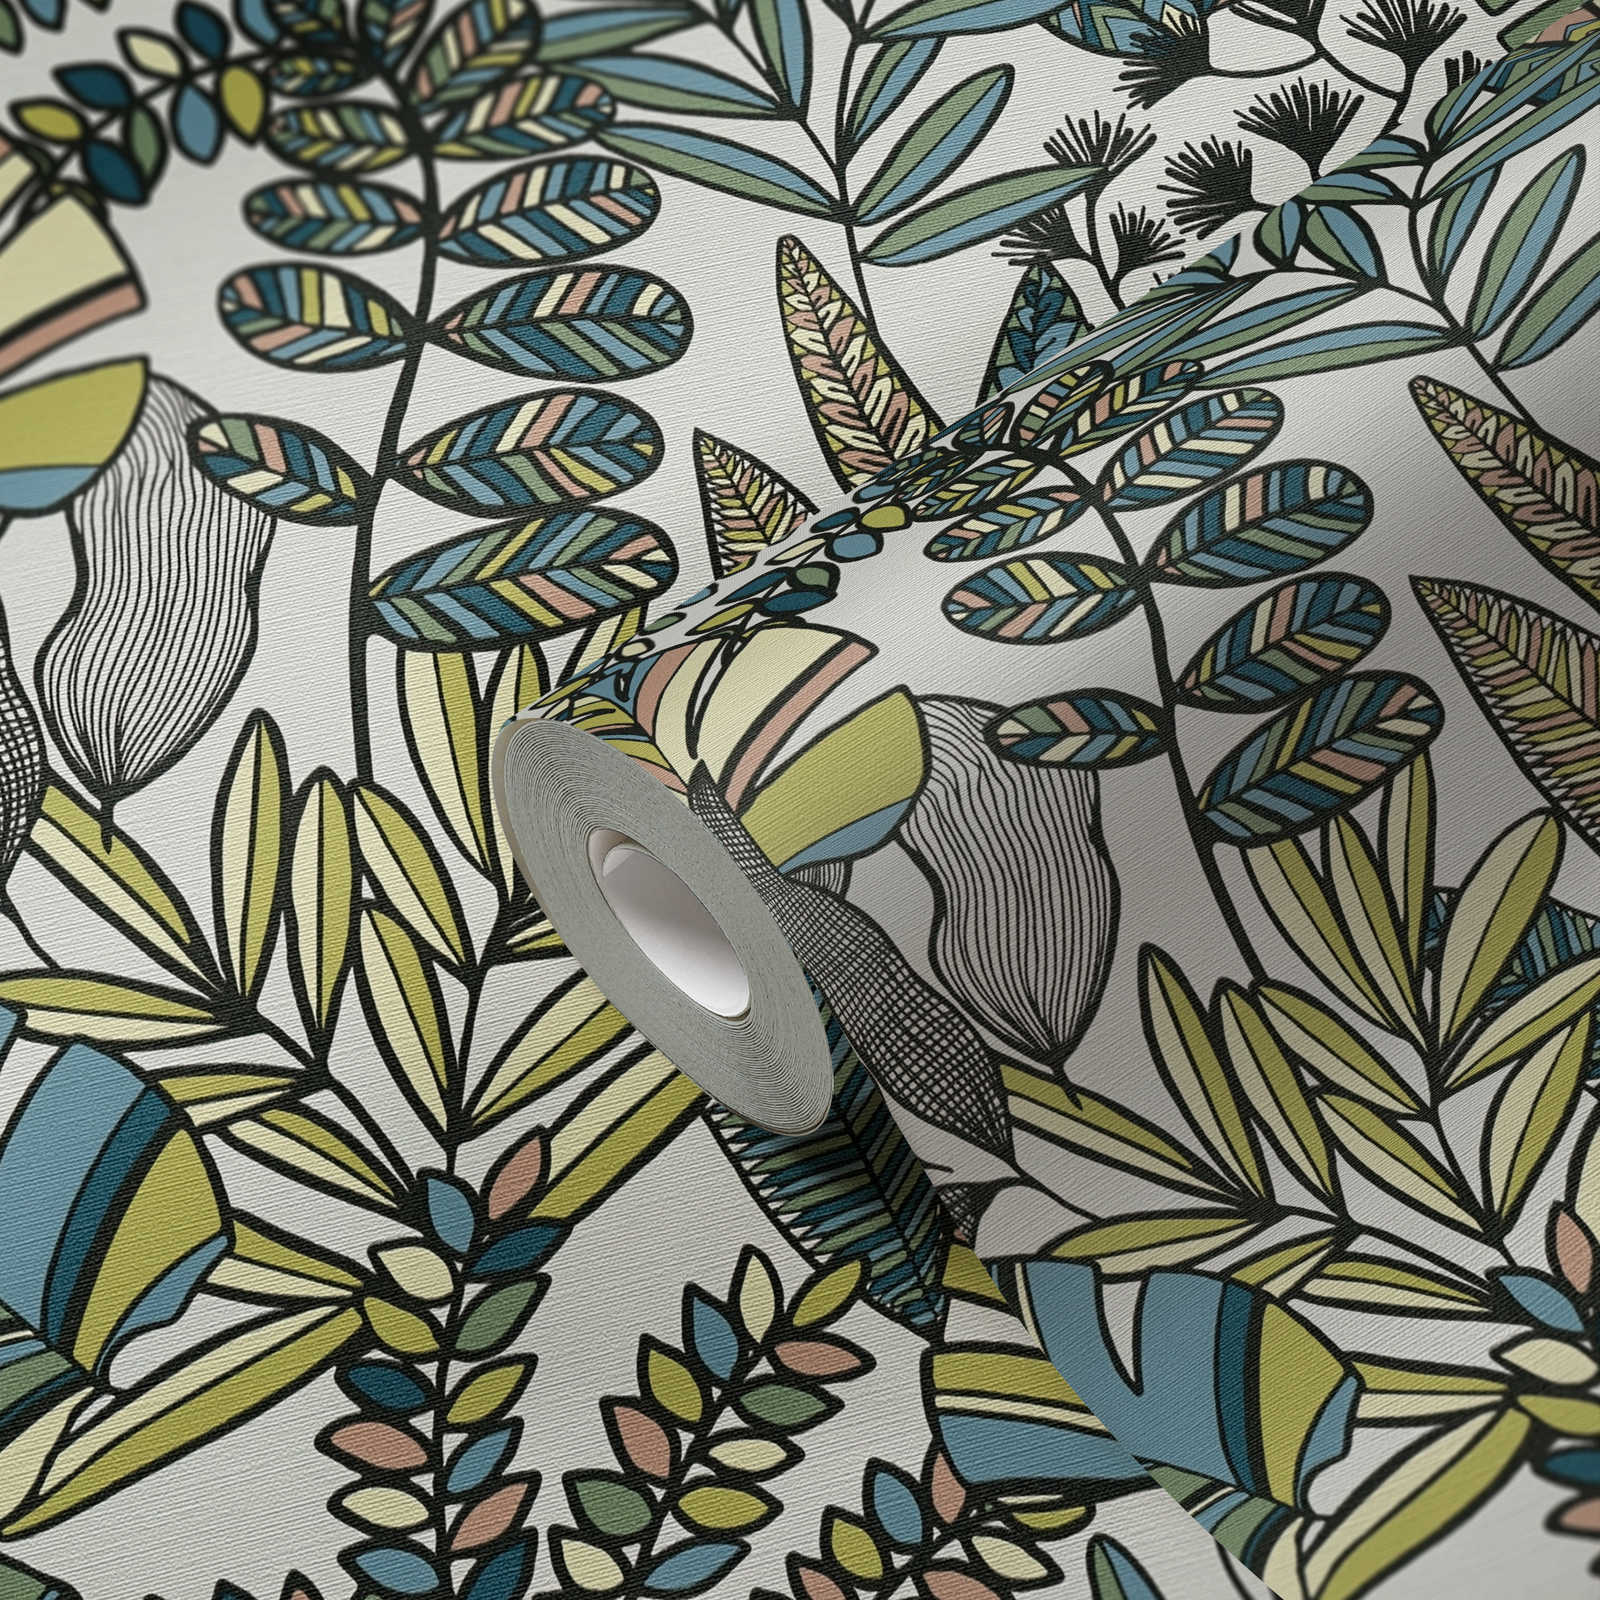             Non-woven wallpaper with large leaves in bold colours - white, black, blue
        